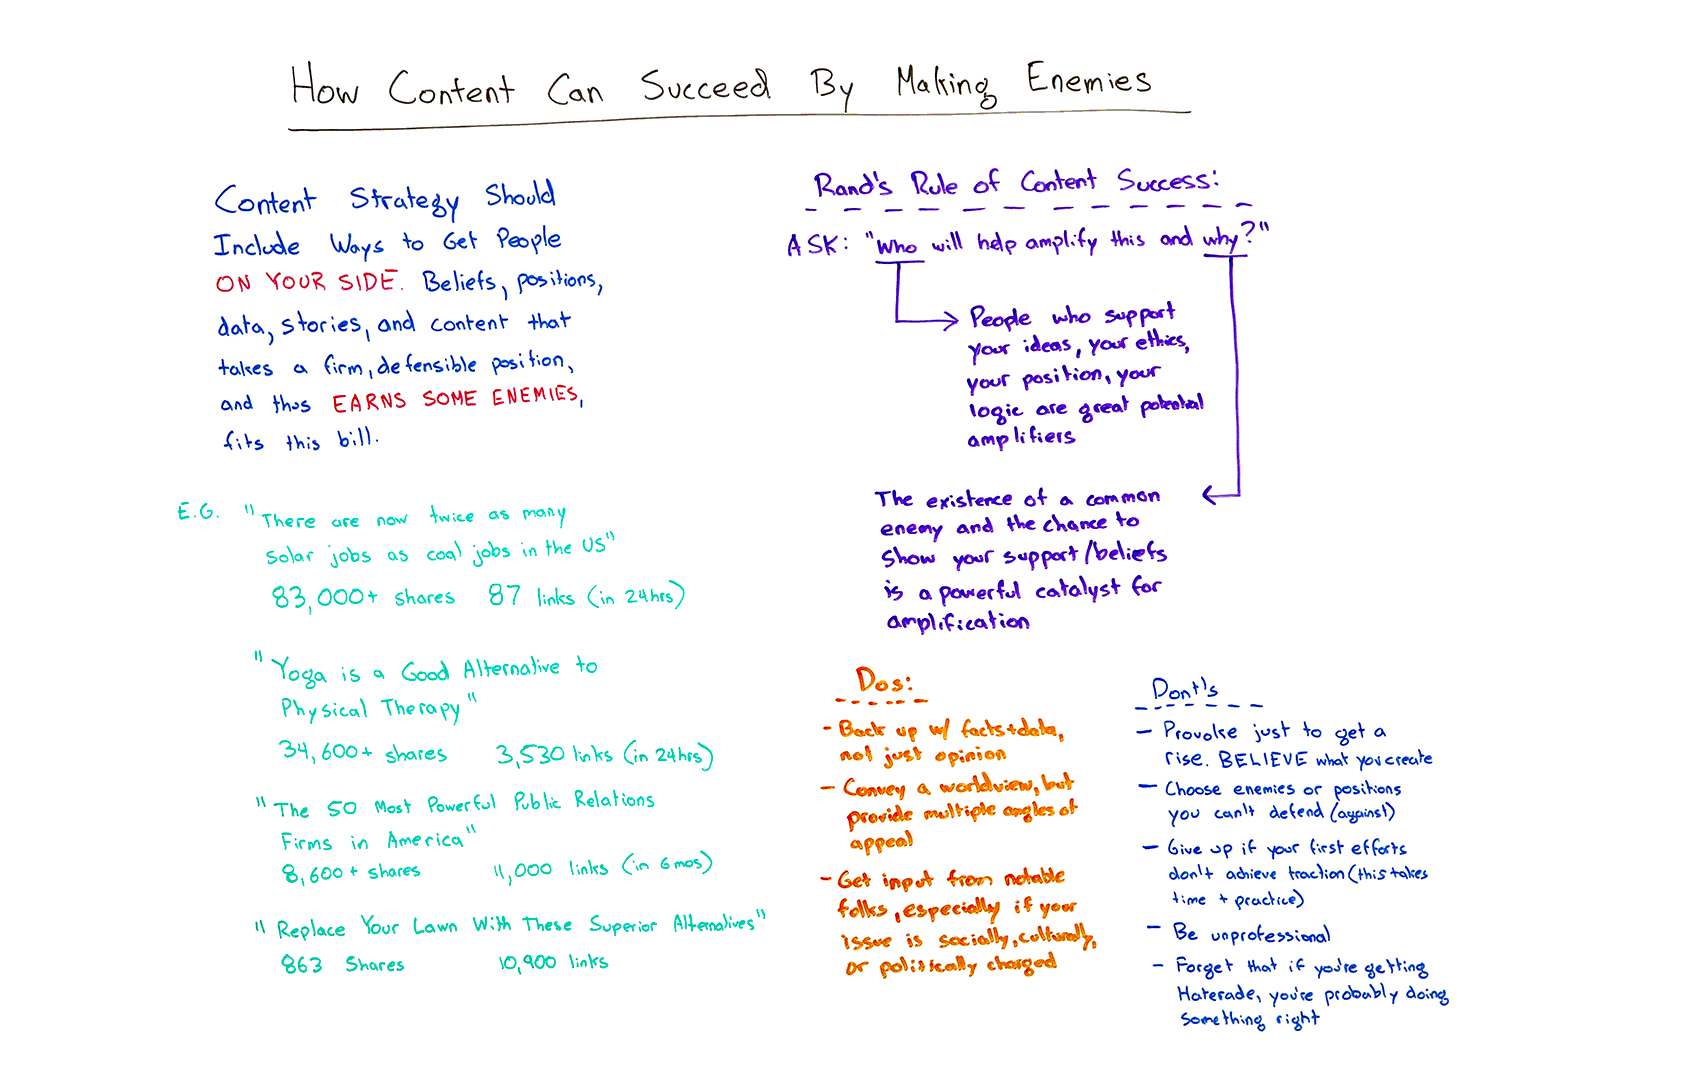 How content can succeed by making enemies